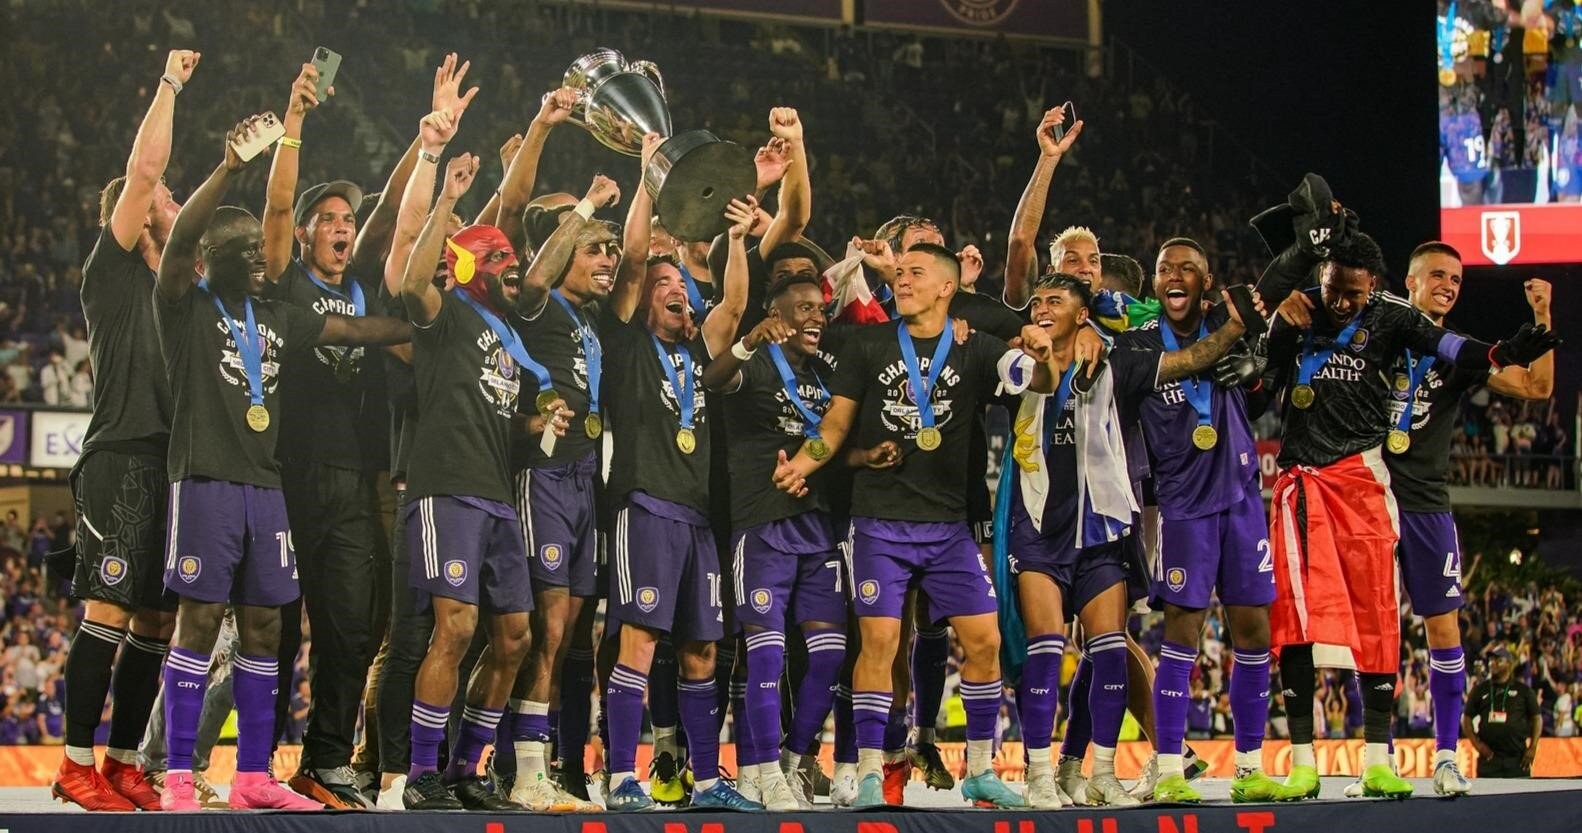 SportMob Which Remaining Us Open Cup Teams Are Favorites?